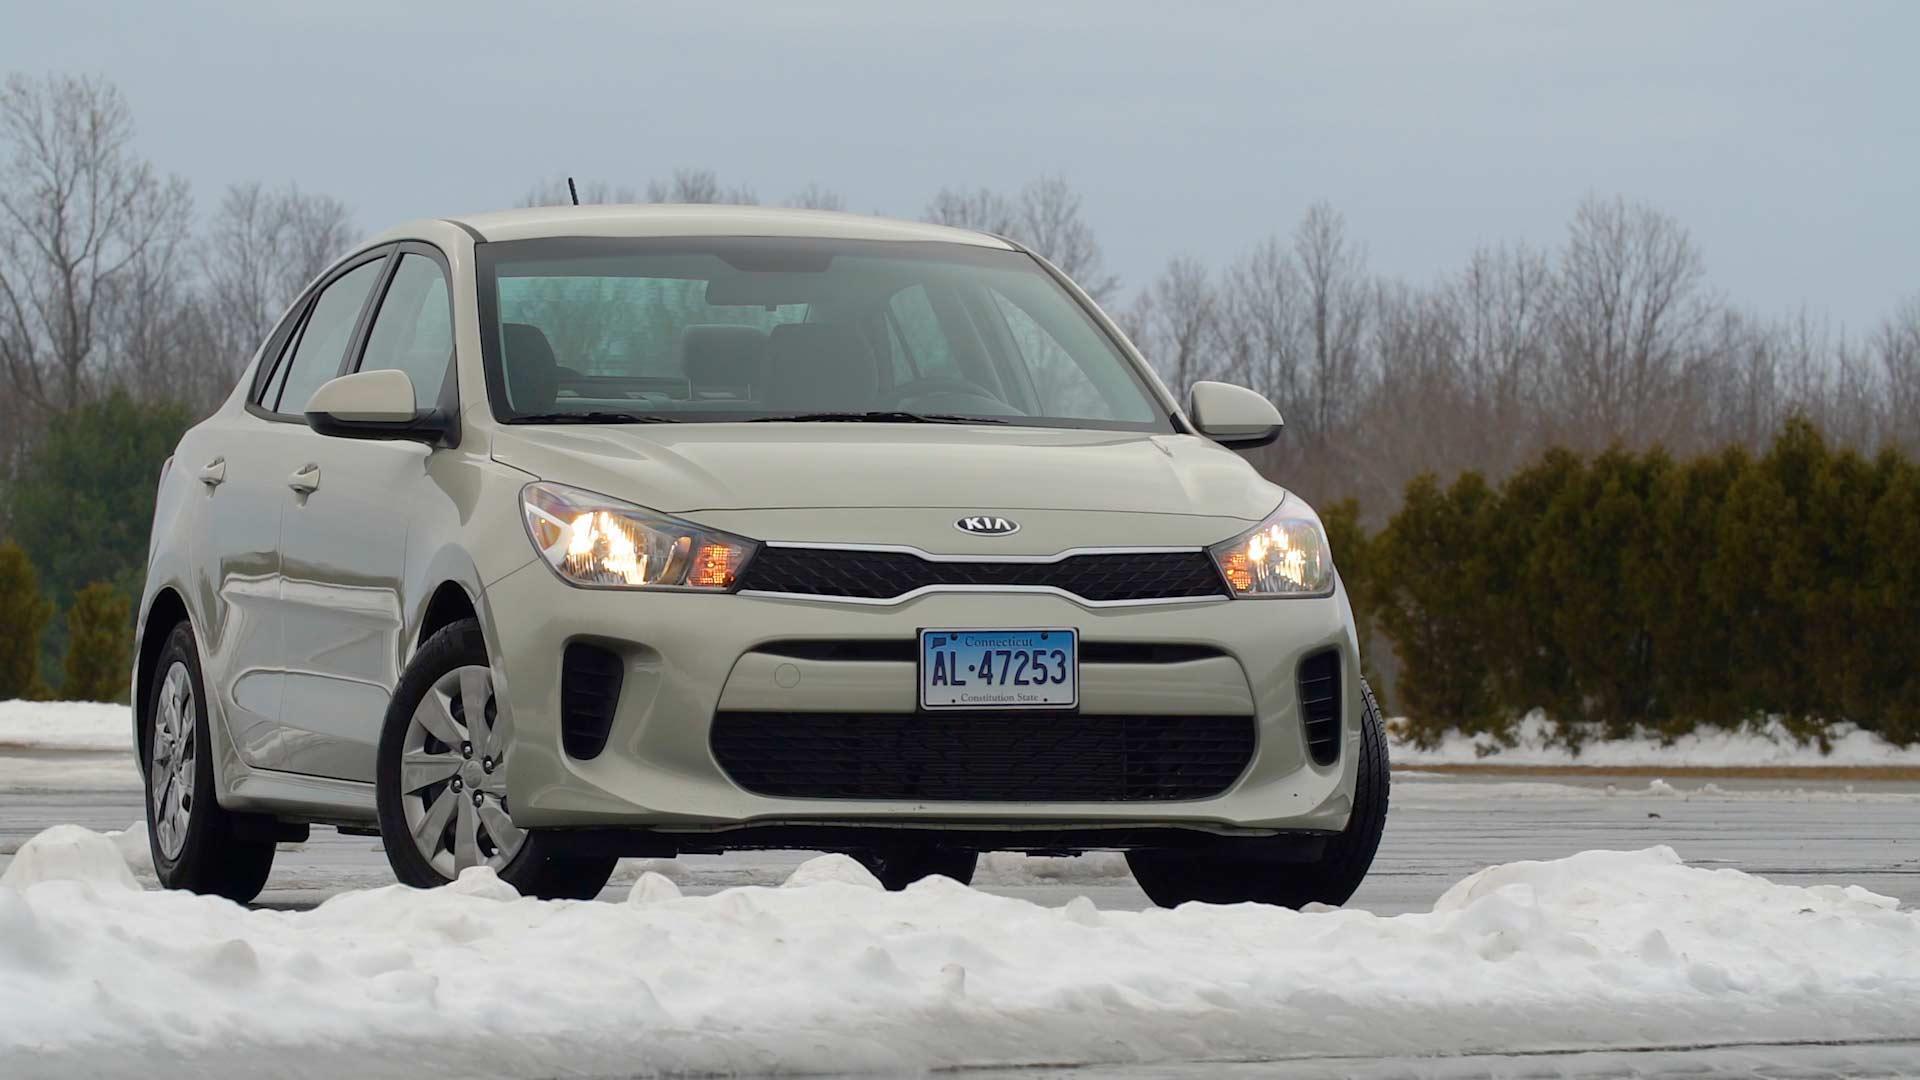 2018 Kia Rio Review, Pricing, & Pictures